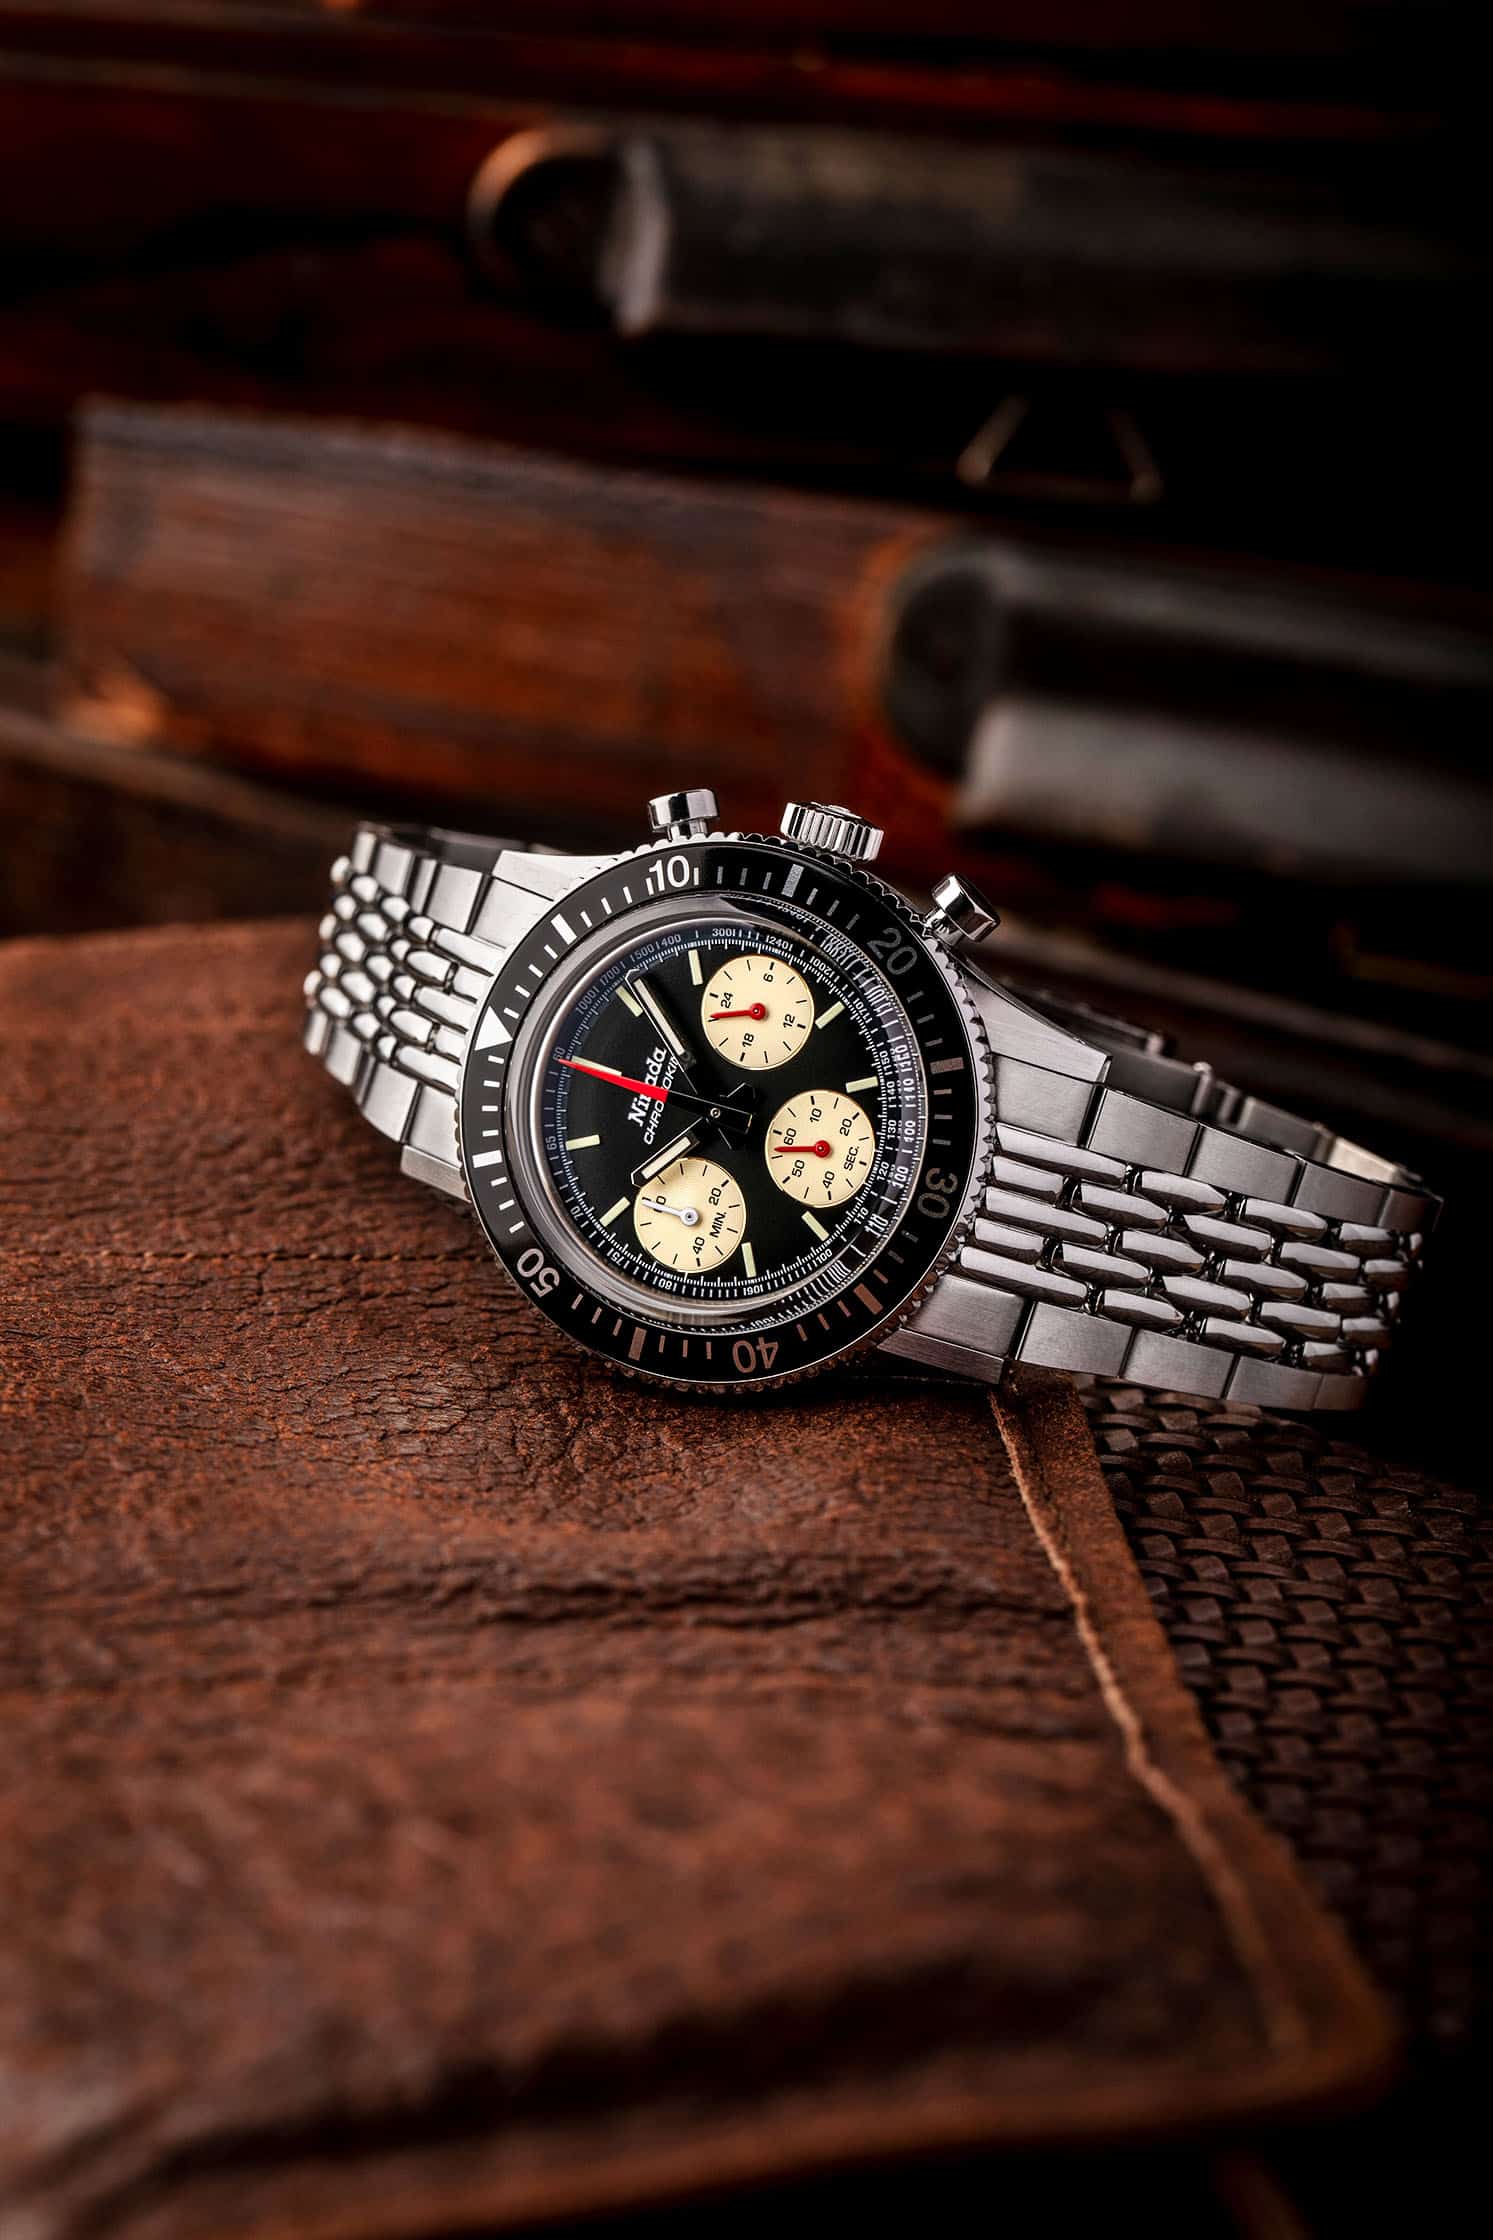 Nivada Grenchen Gives Us the Best of All Worlds with Chronoking Meca-Quartz  - Worn & Wound